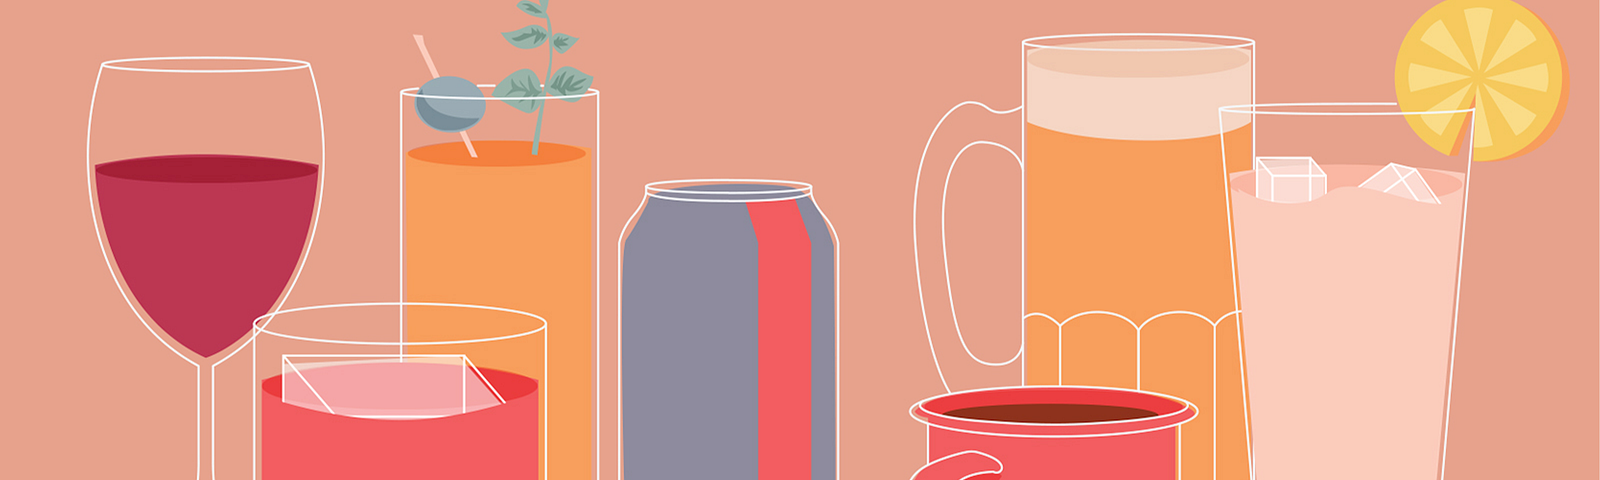 An illustration of various beverages; a wine glass, a soda can, a mug of coffee, etc.